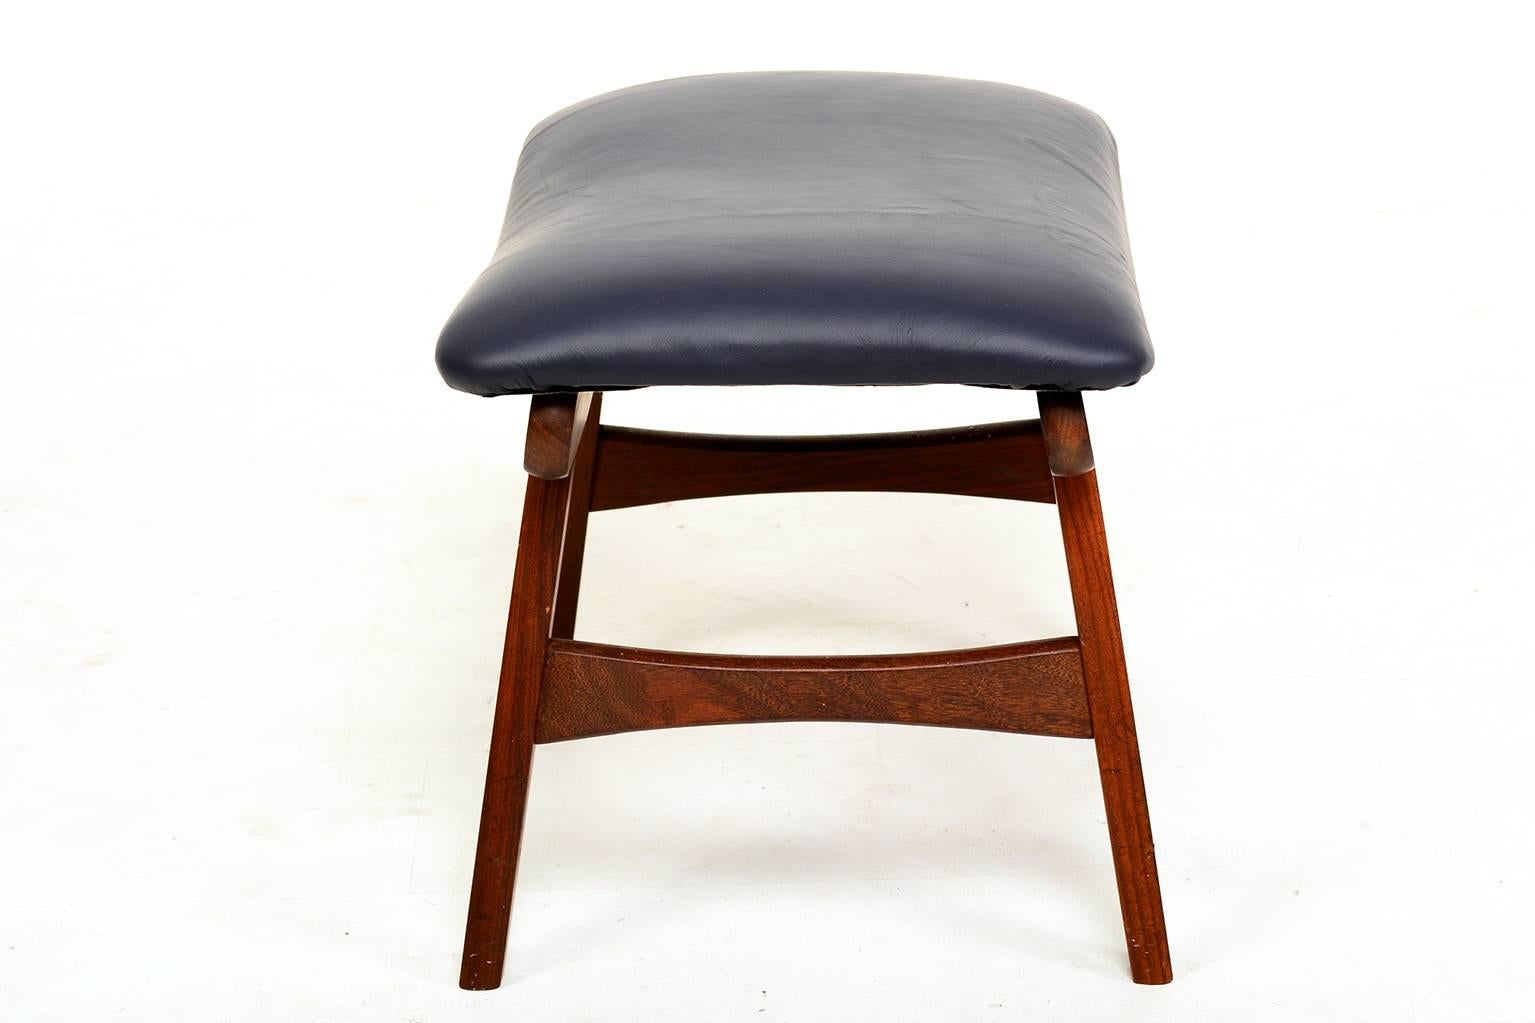 We are pleased to offer for your consideration a vintage Danish modern teak stool with blue leather.

Dimensions: 14.75 in.Hx20 in.Wx14 in.D, Seat : 14 1/2